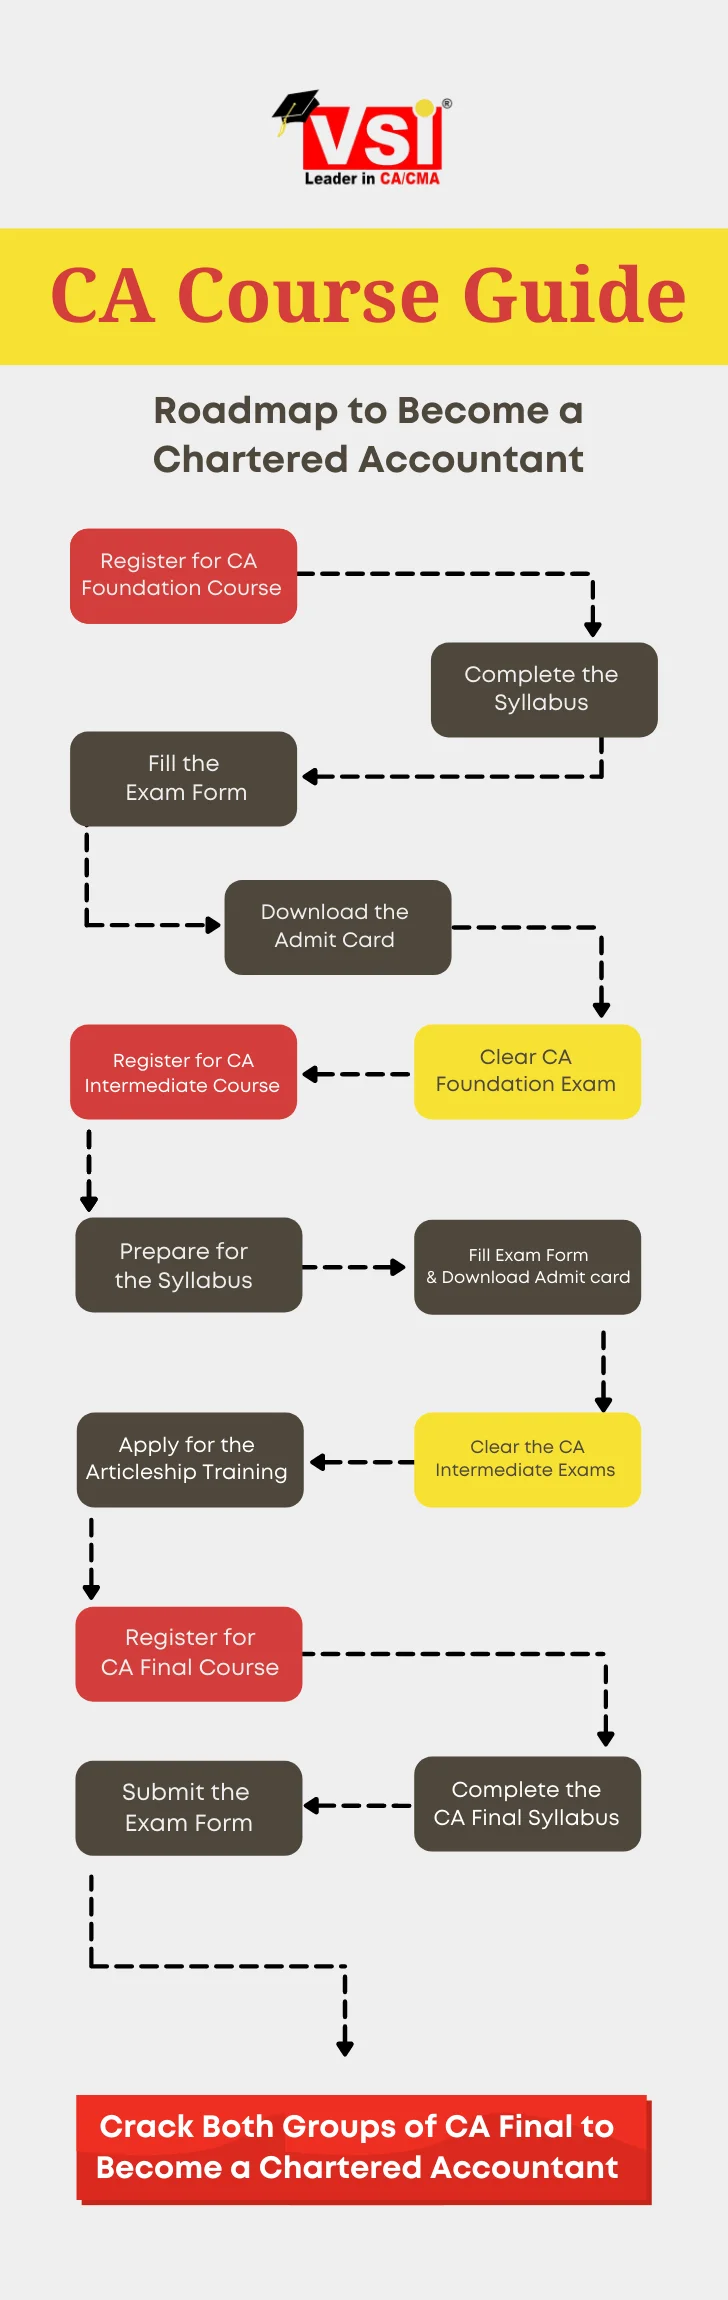 CA Course Guide - Roadmap to become a Chartered Accountant